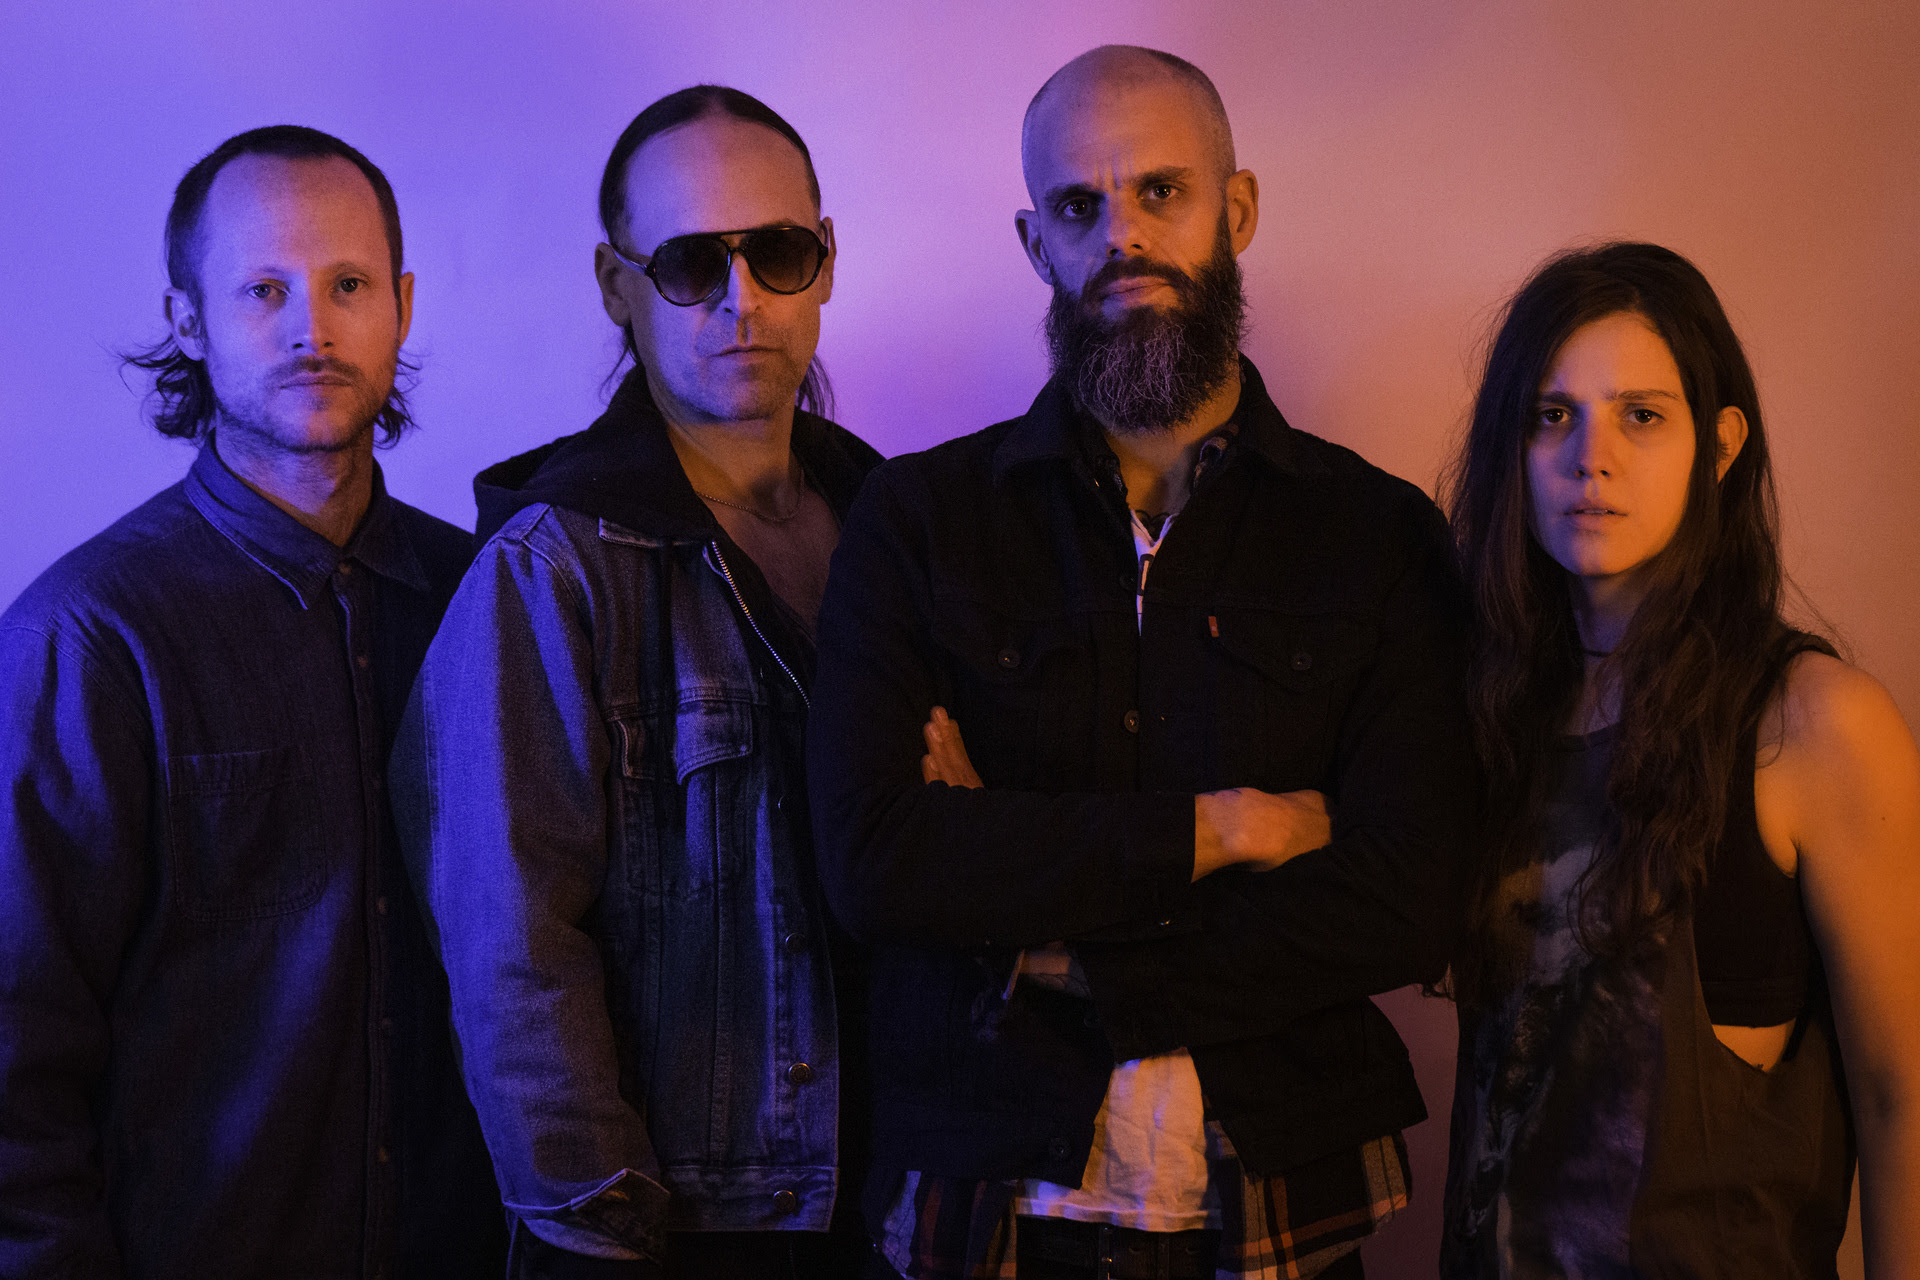 Baroness’ Sebastian Thomson to play drums on ‘Late Night With Seth Meyers’